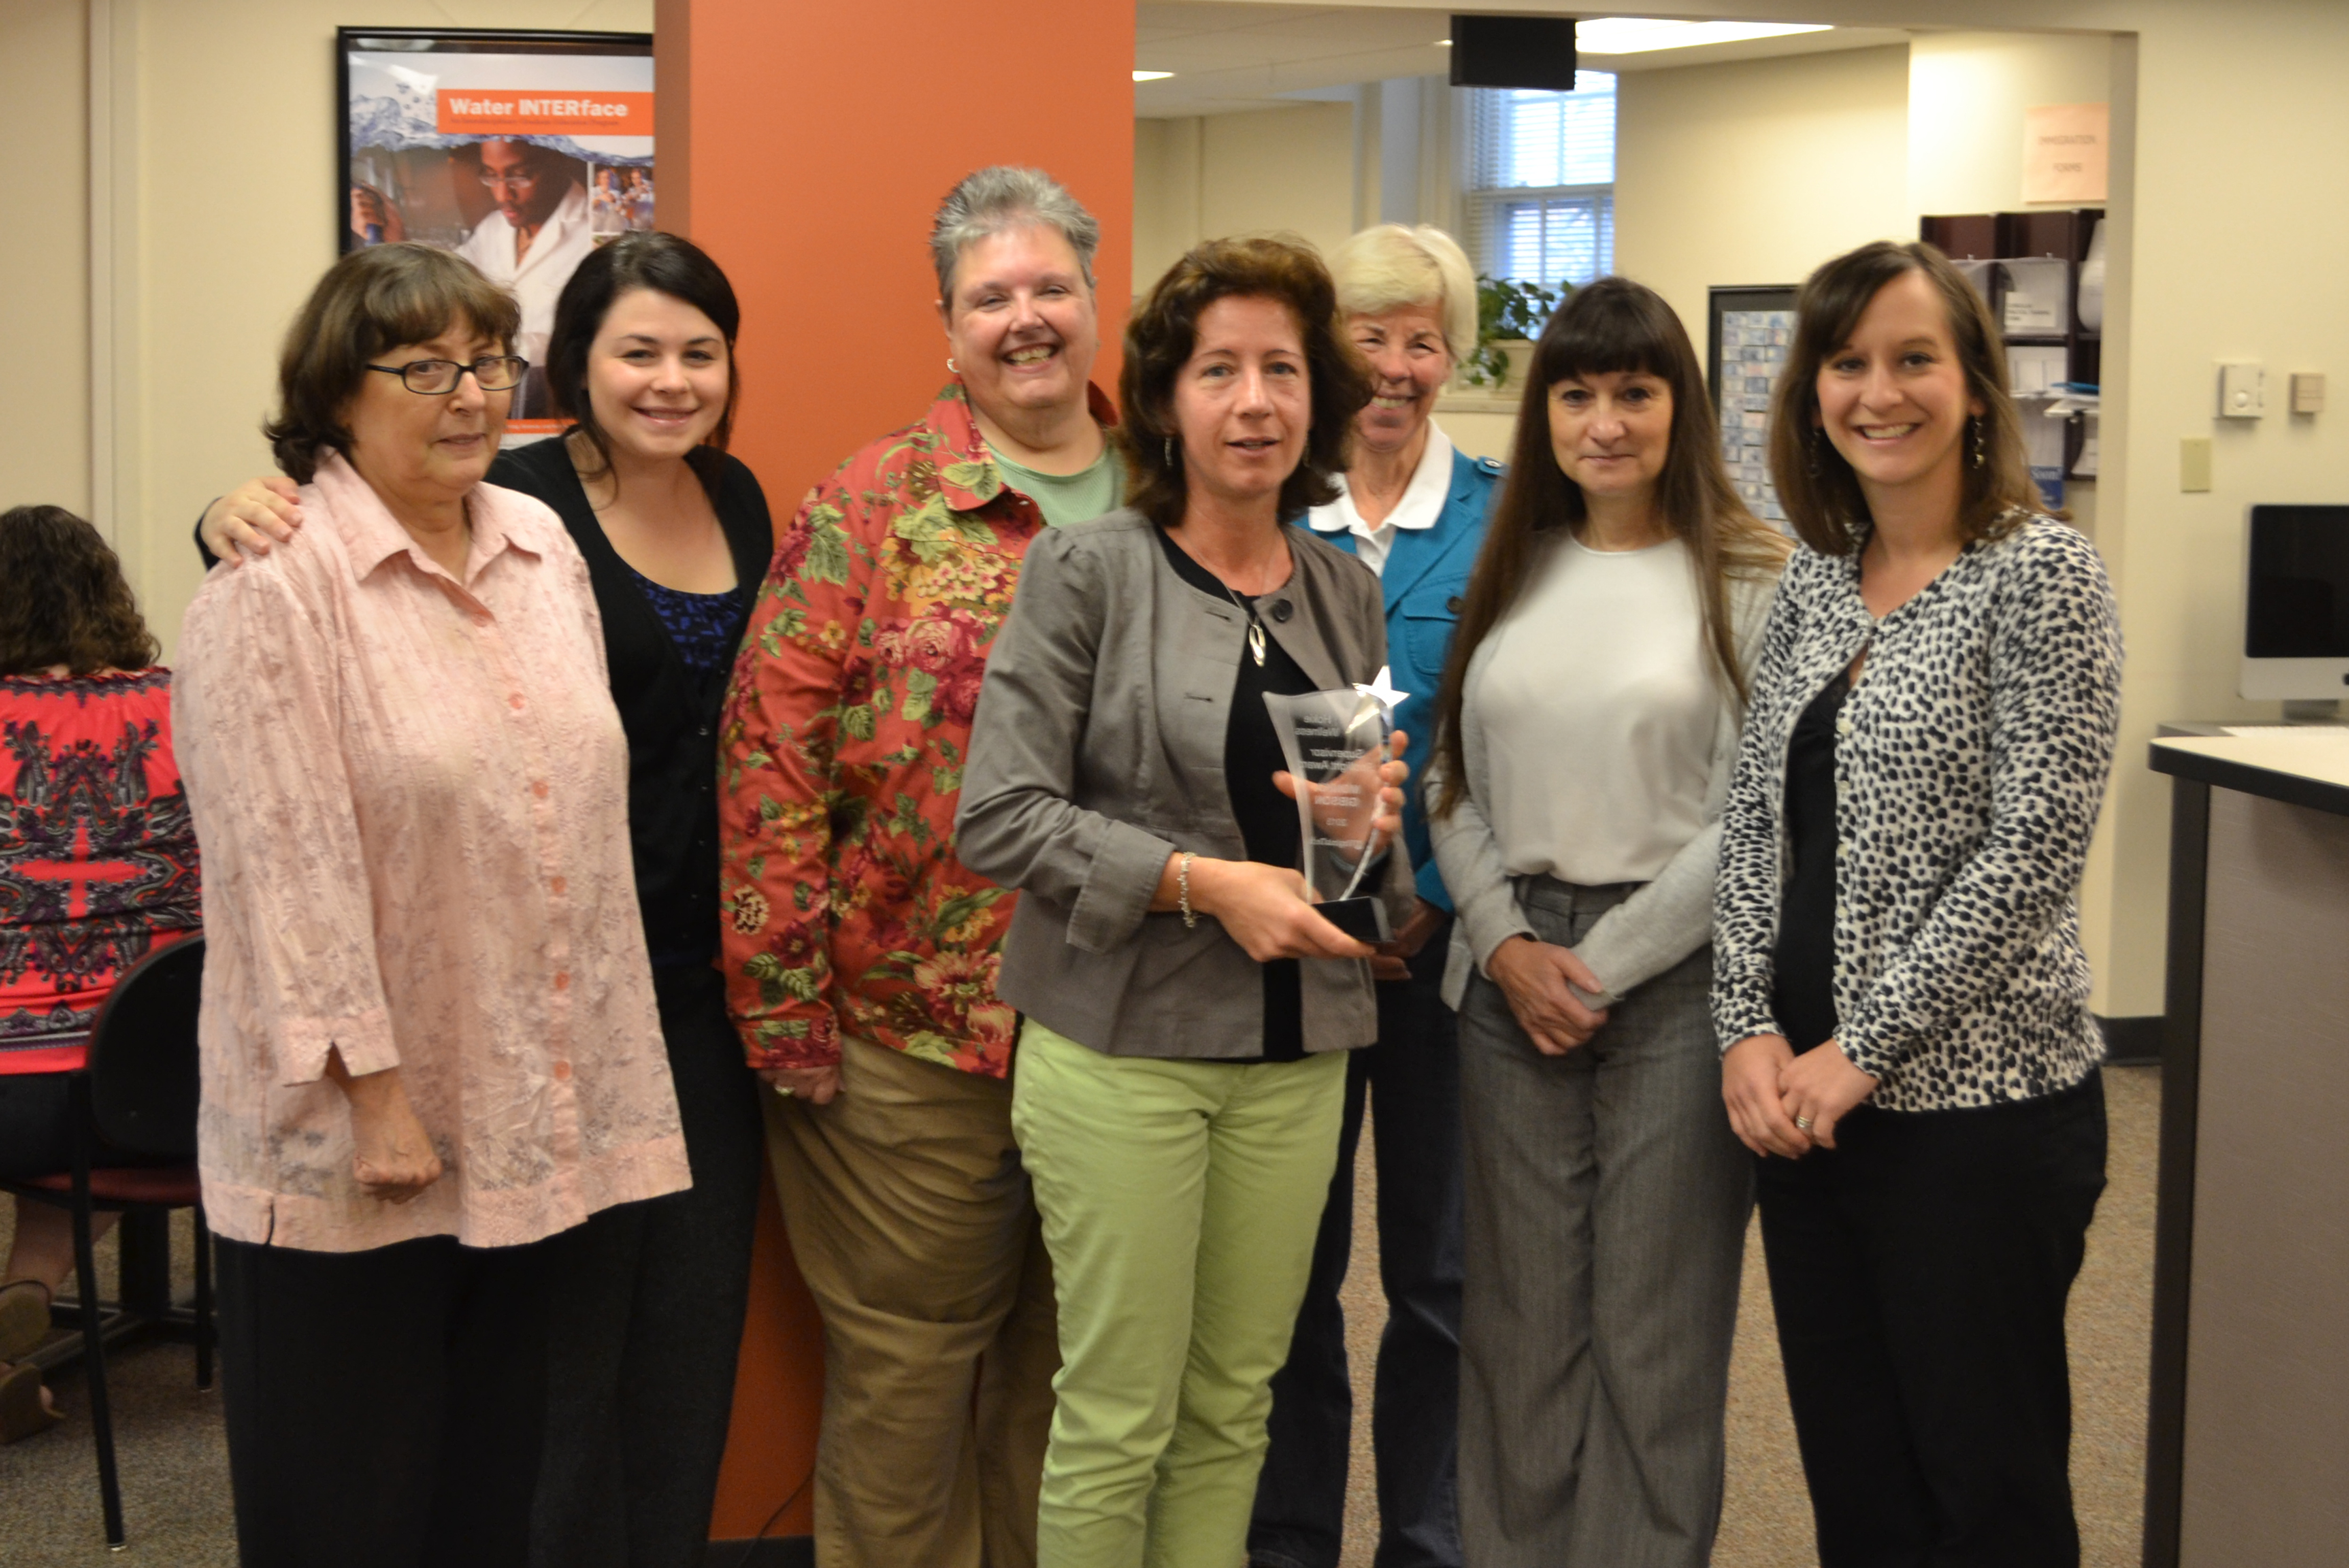 Monika Gibson, Supervisor Spotlight Award winner, stands with her team at the Graduate Life Center at Donaldson Brown. From left to right: Pat Goodrich, Nicky Bertone, Zelma Harris, Monika Gibson, Ruth Athanson, Tina Lapel, Lauren Surface.